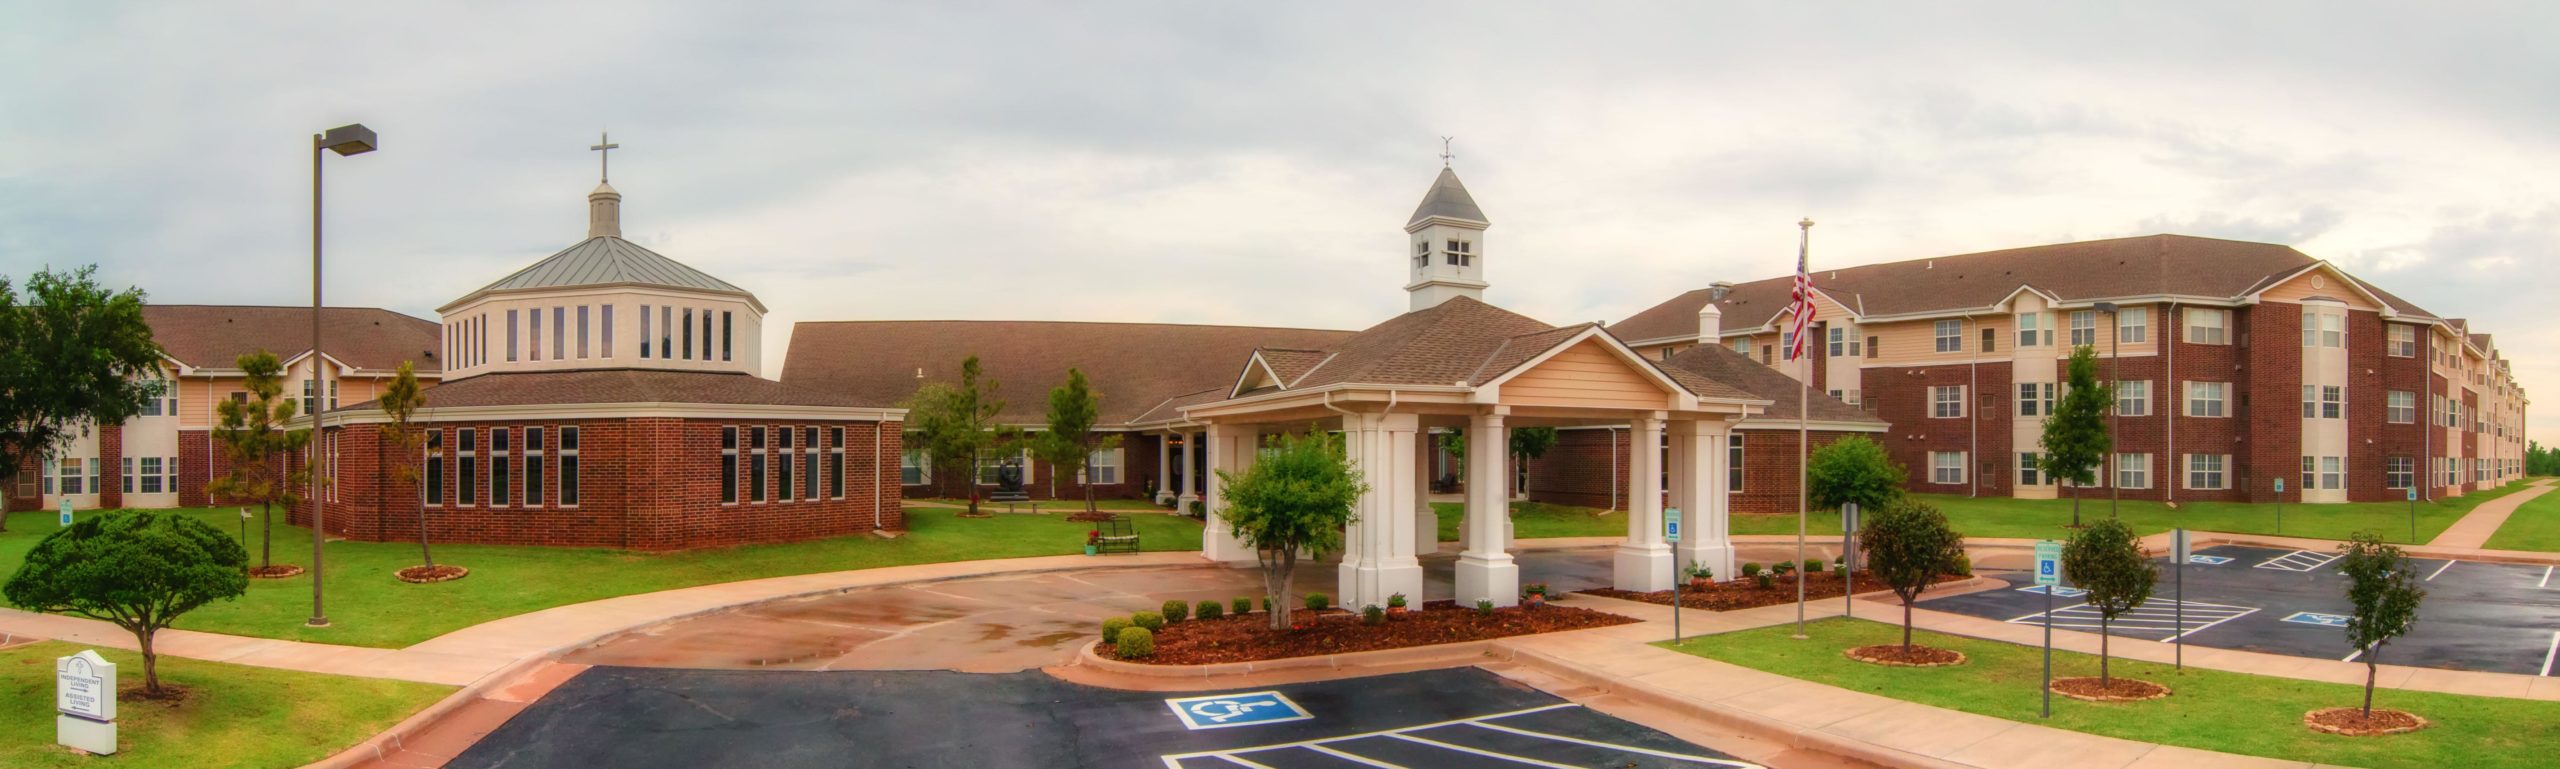 Saint Ann Retirement Center Assisted Living okc and Independent Living